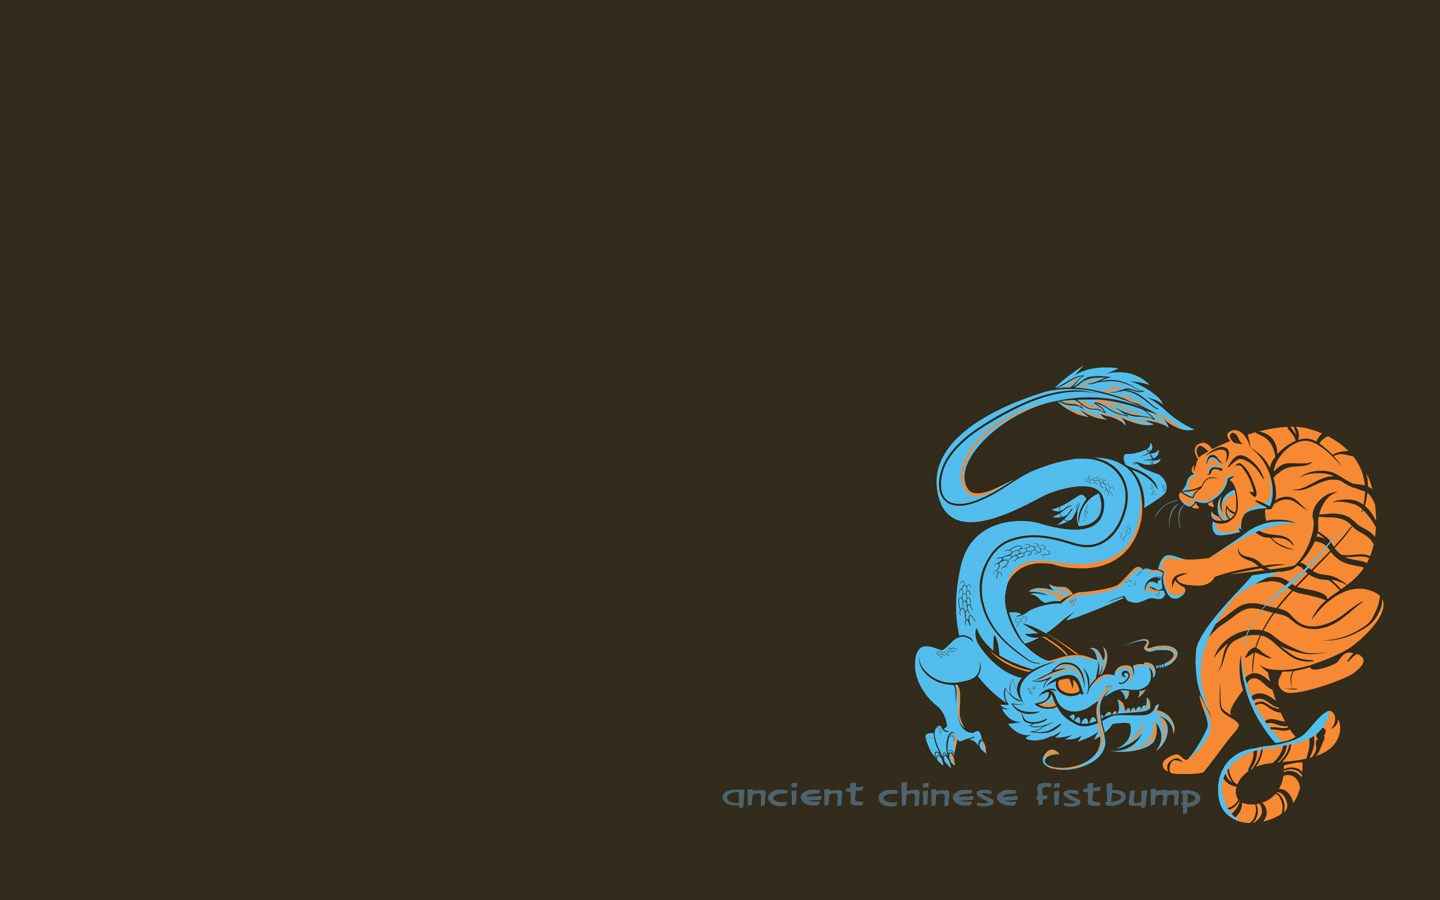 Ancient Chinese Wallpaper 1440x900 Ancient Chinese Fistbump